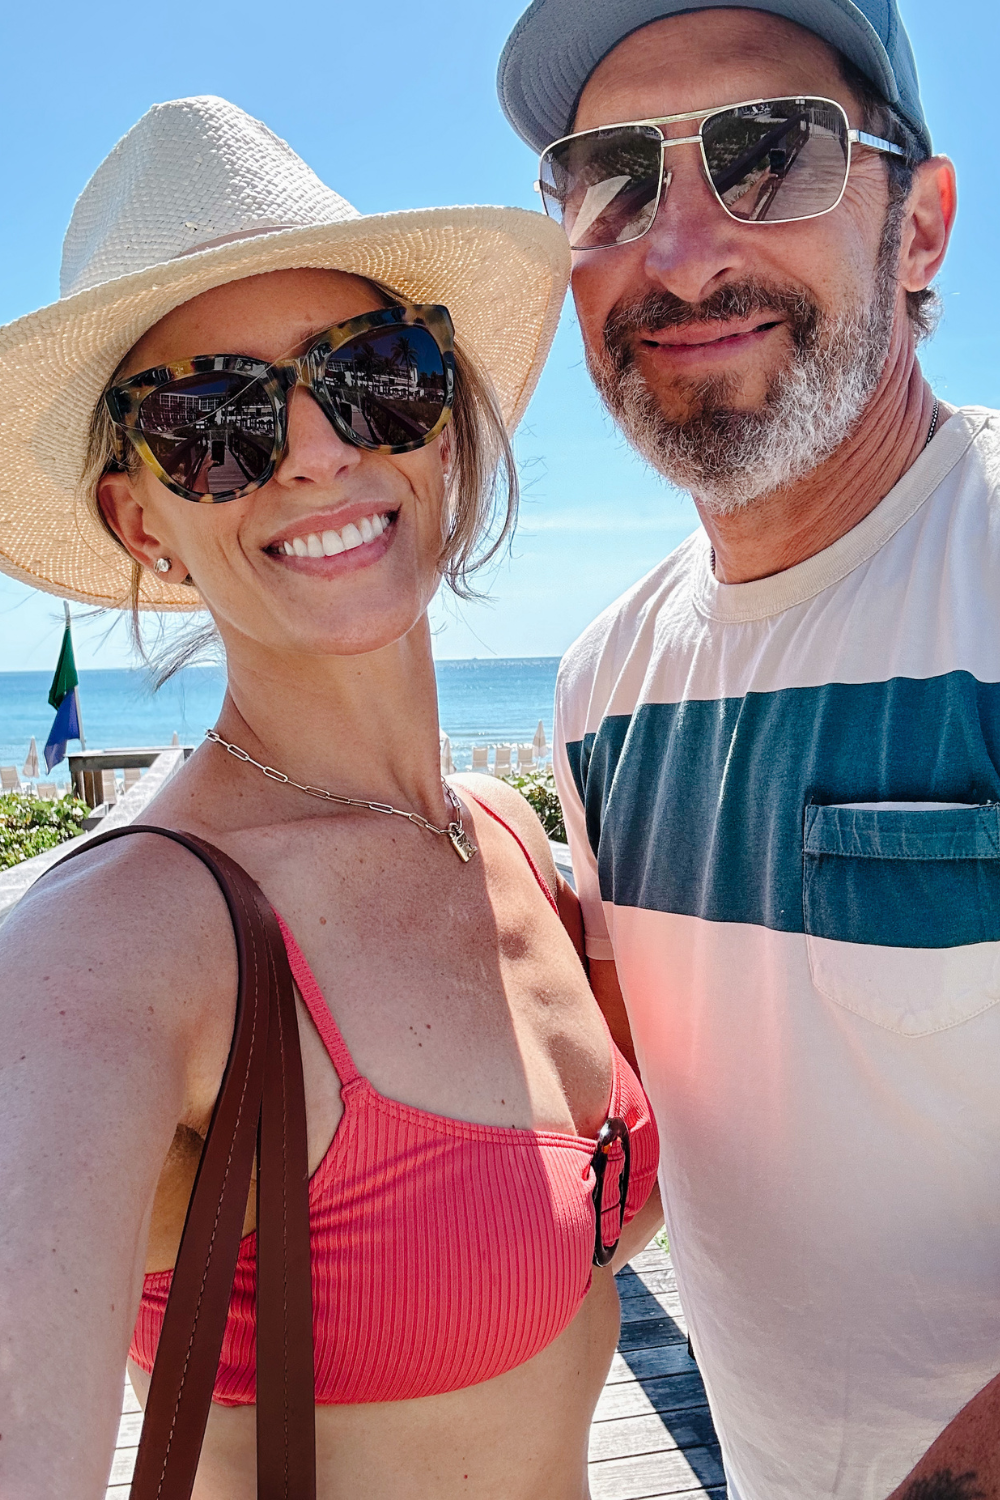 Suzanne and her husband on a beach vacation